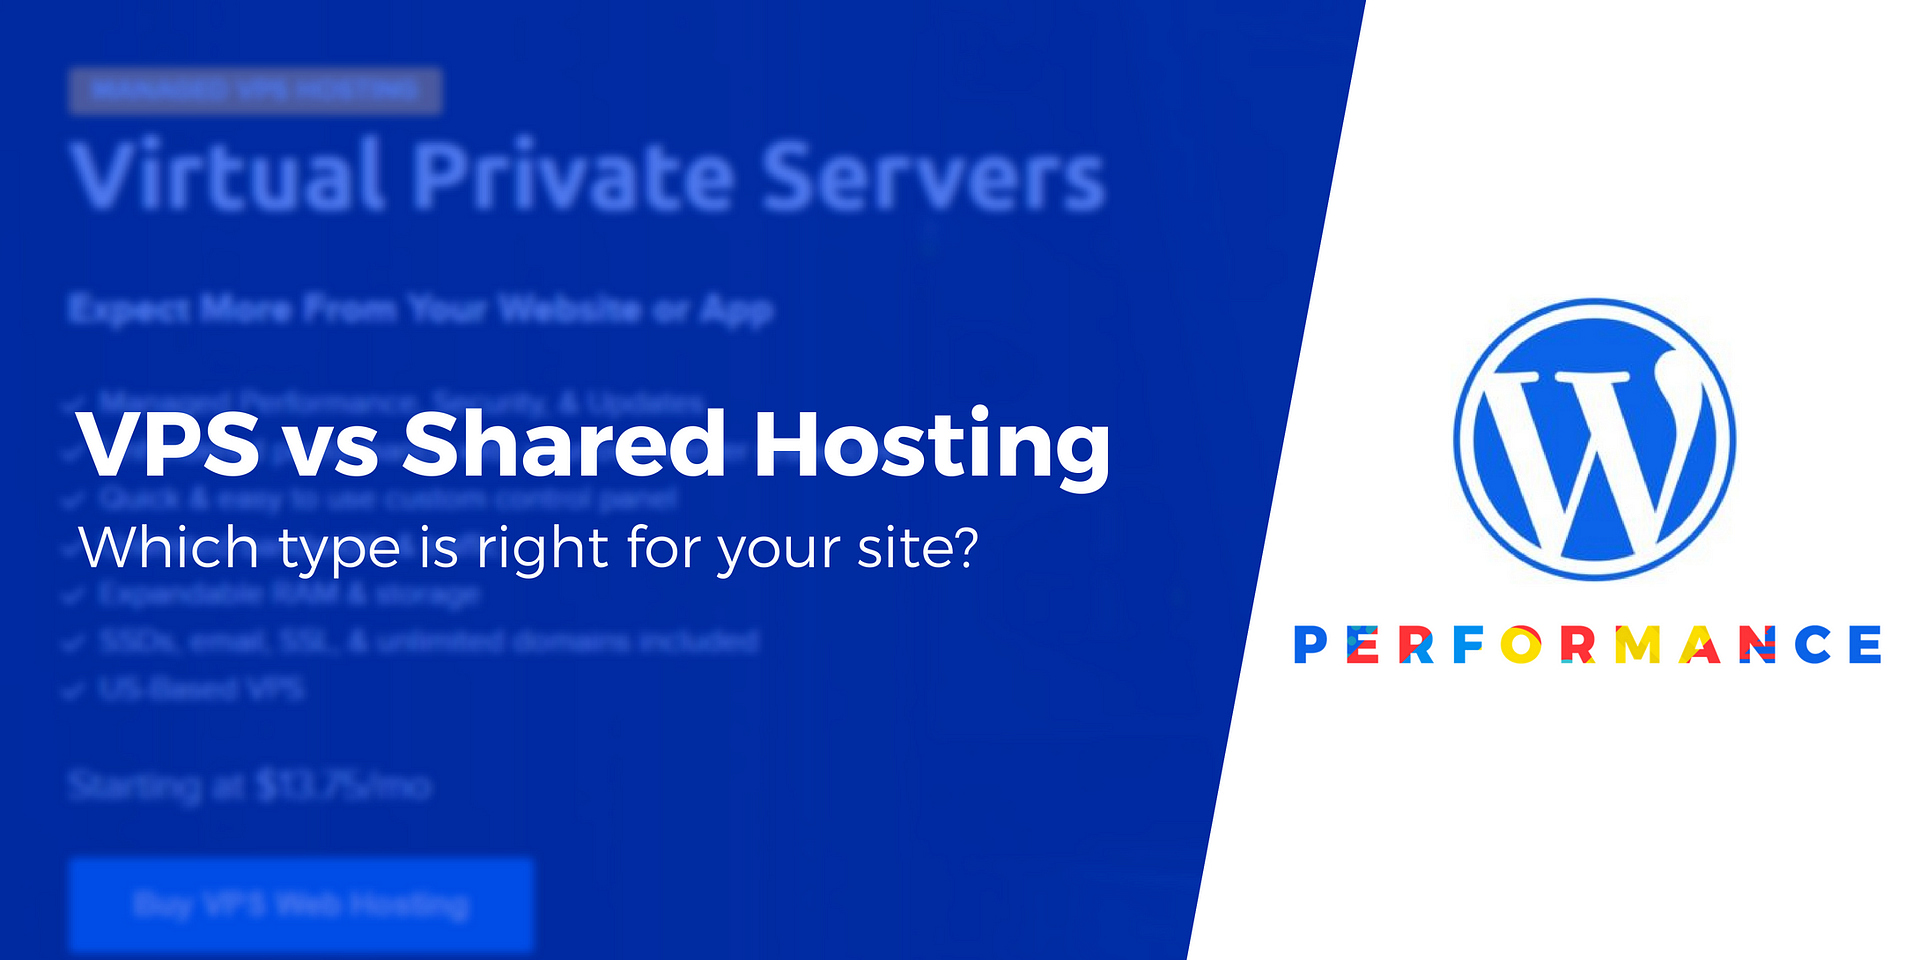 Vps Vs Shared Hosting Is Vps Hosting Right For Your Wordpress Site Images, Photos, Reviews